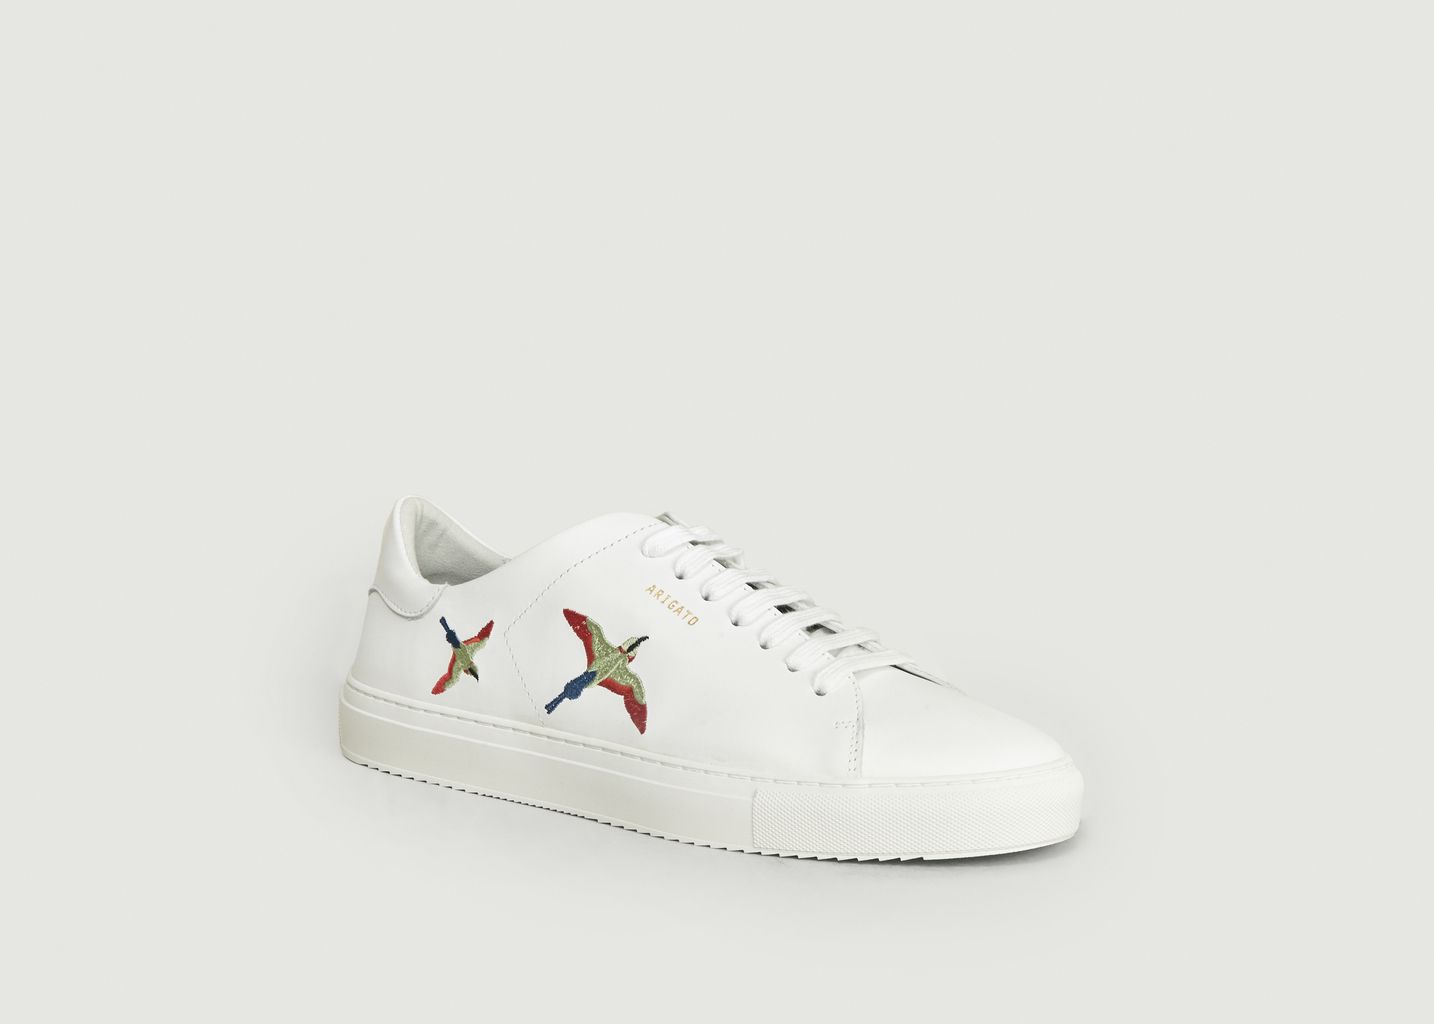 Clean 90 Leather Sneakers With Embroidered Birds - Axel Arigato